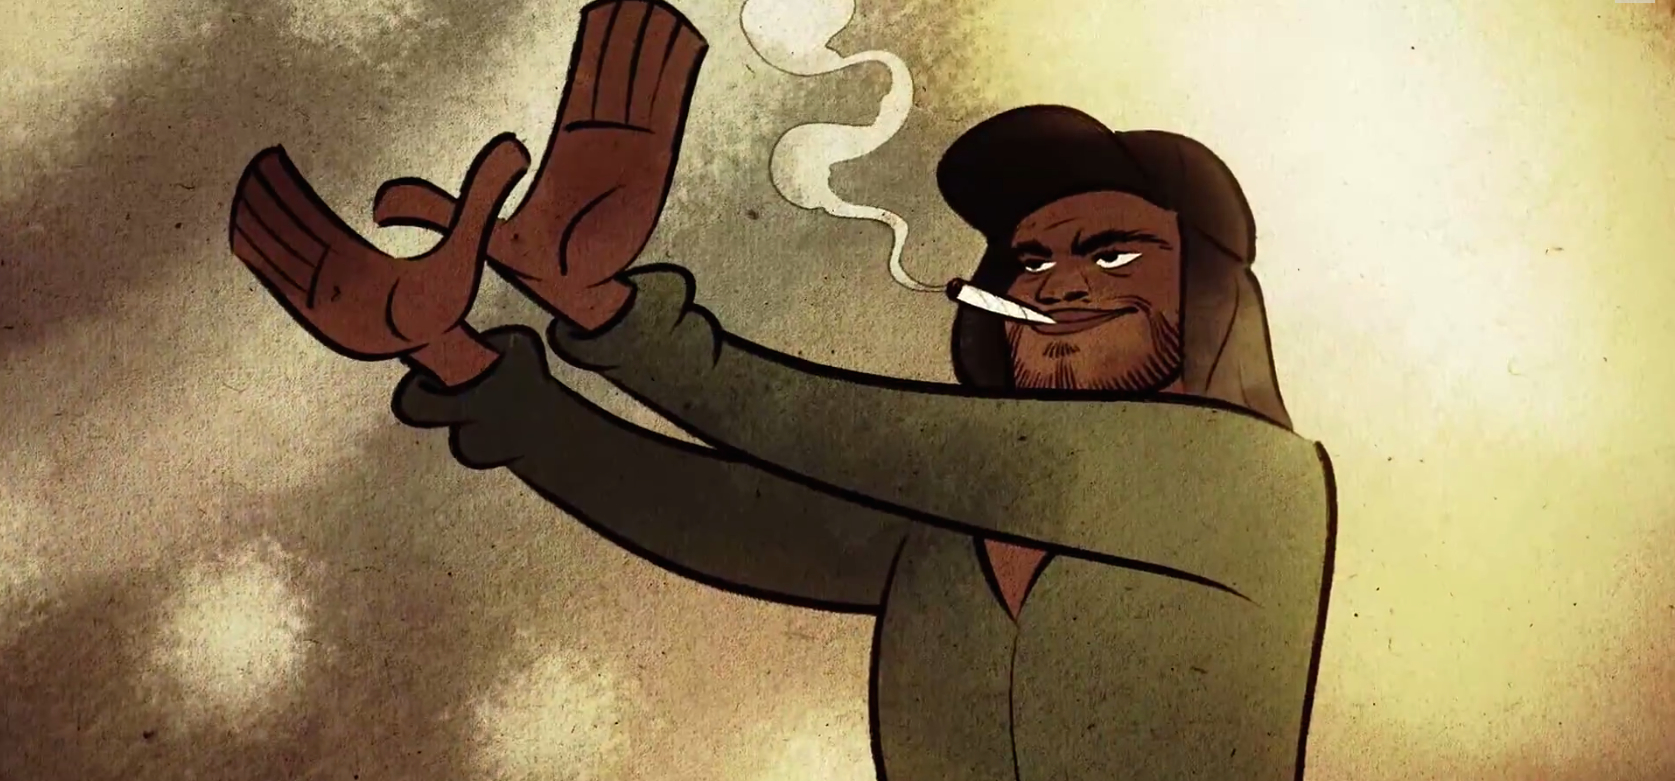 Story Time with Method Man, Animation (Video) - Third Monk